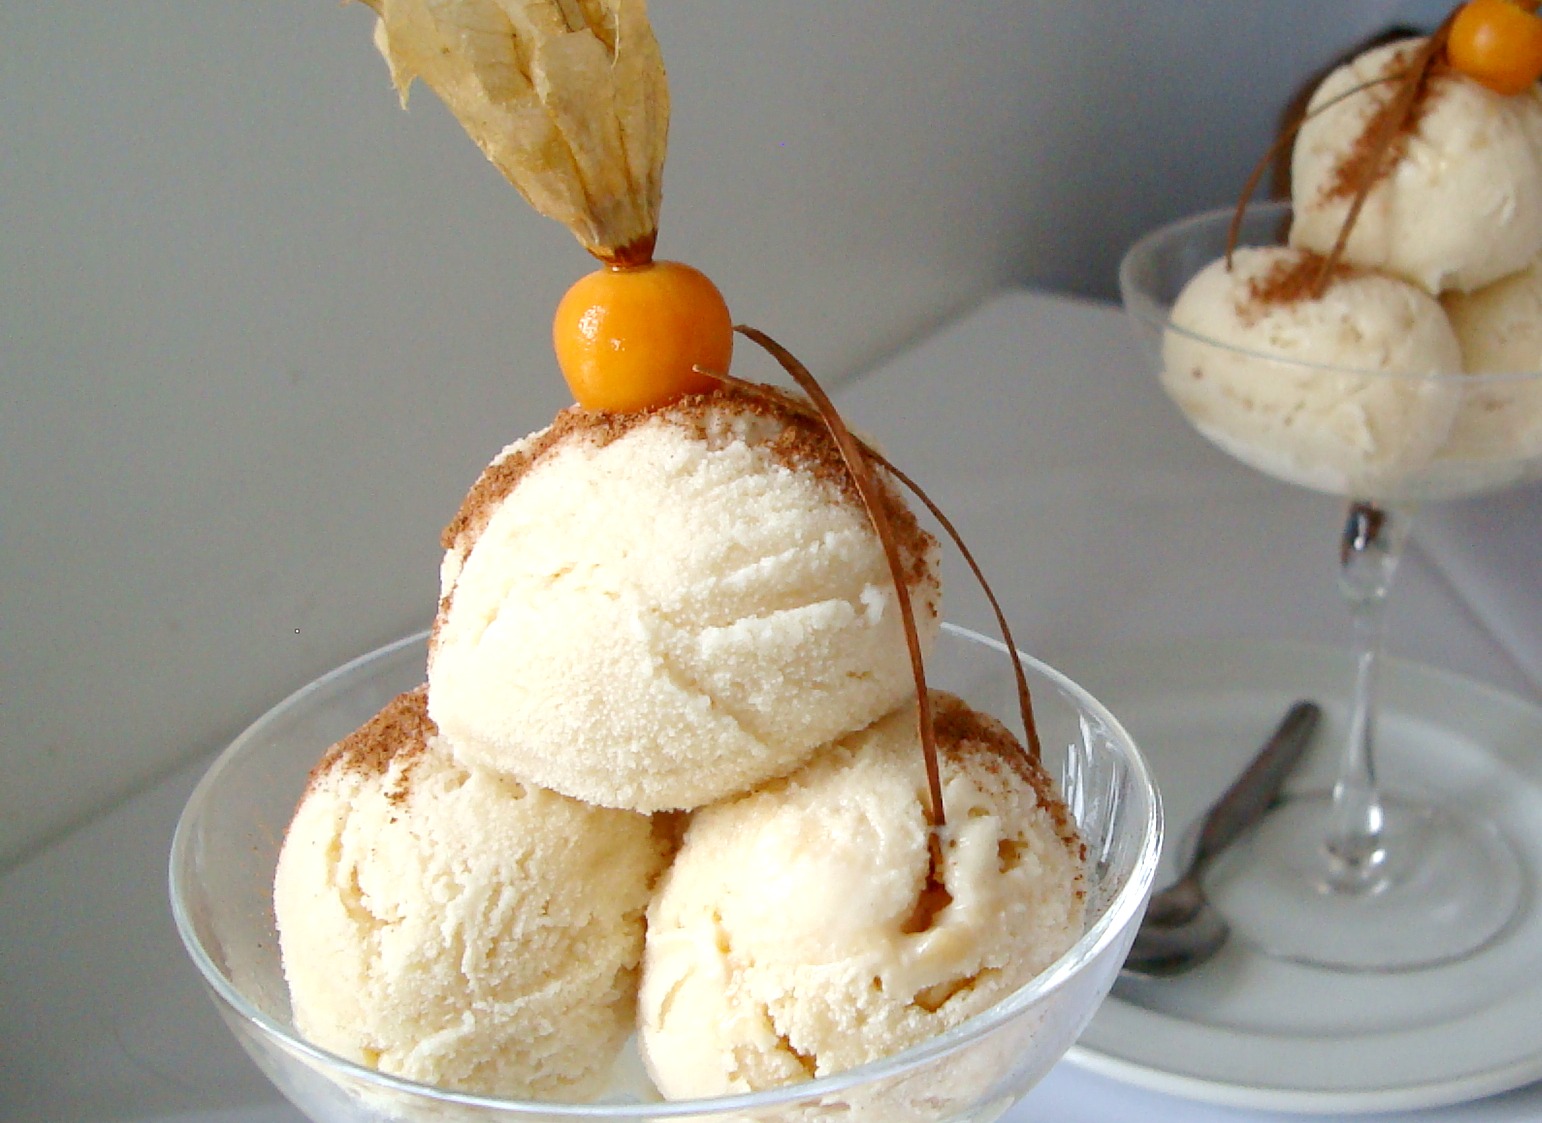 Creamy queso helado, a Peruvian dish similar to ice cream commonly found in Arequipa.